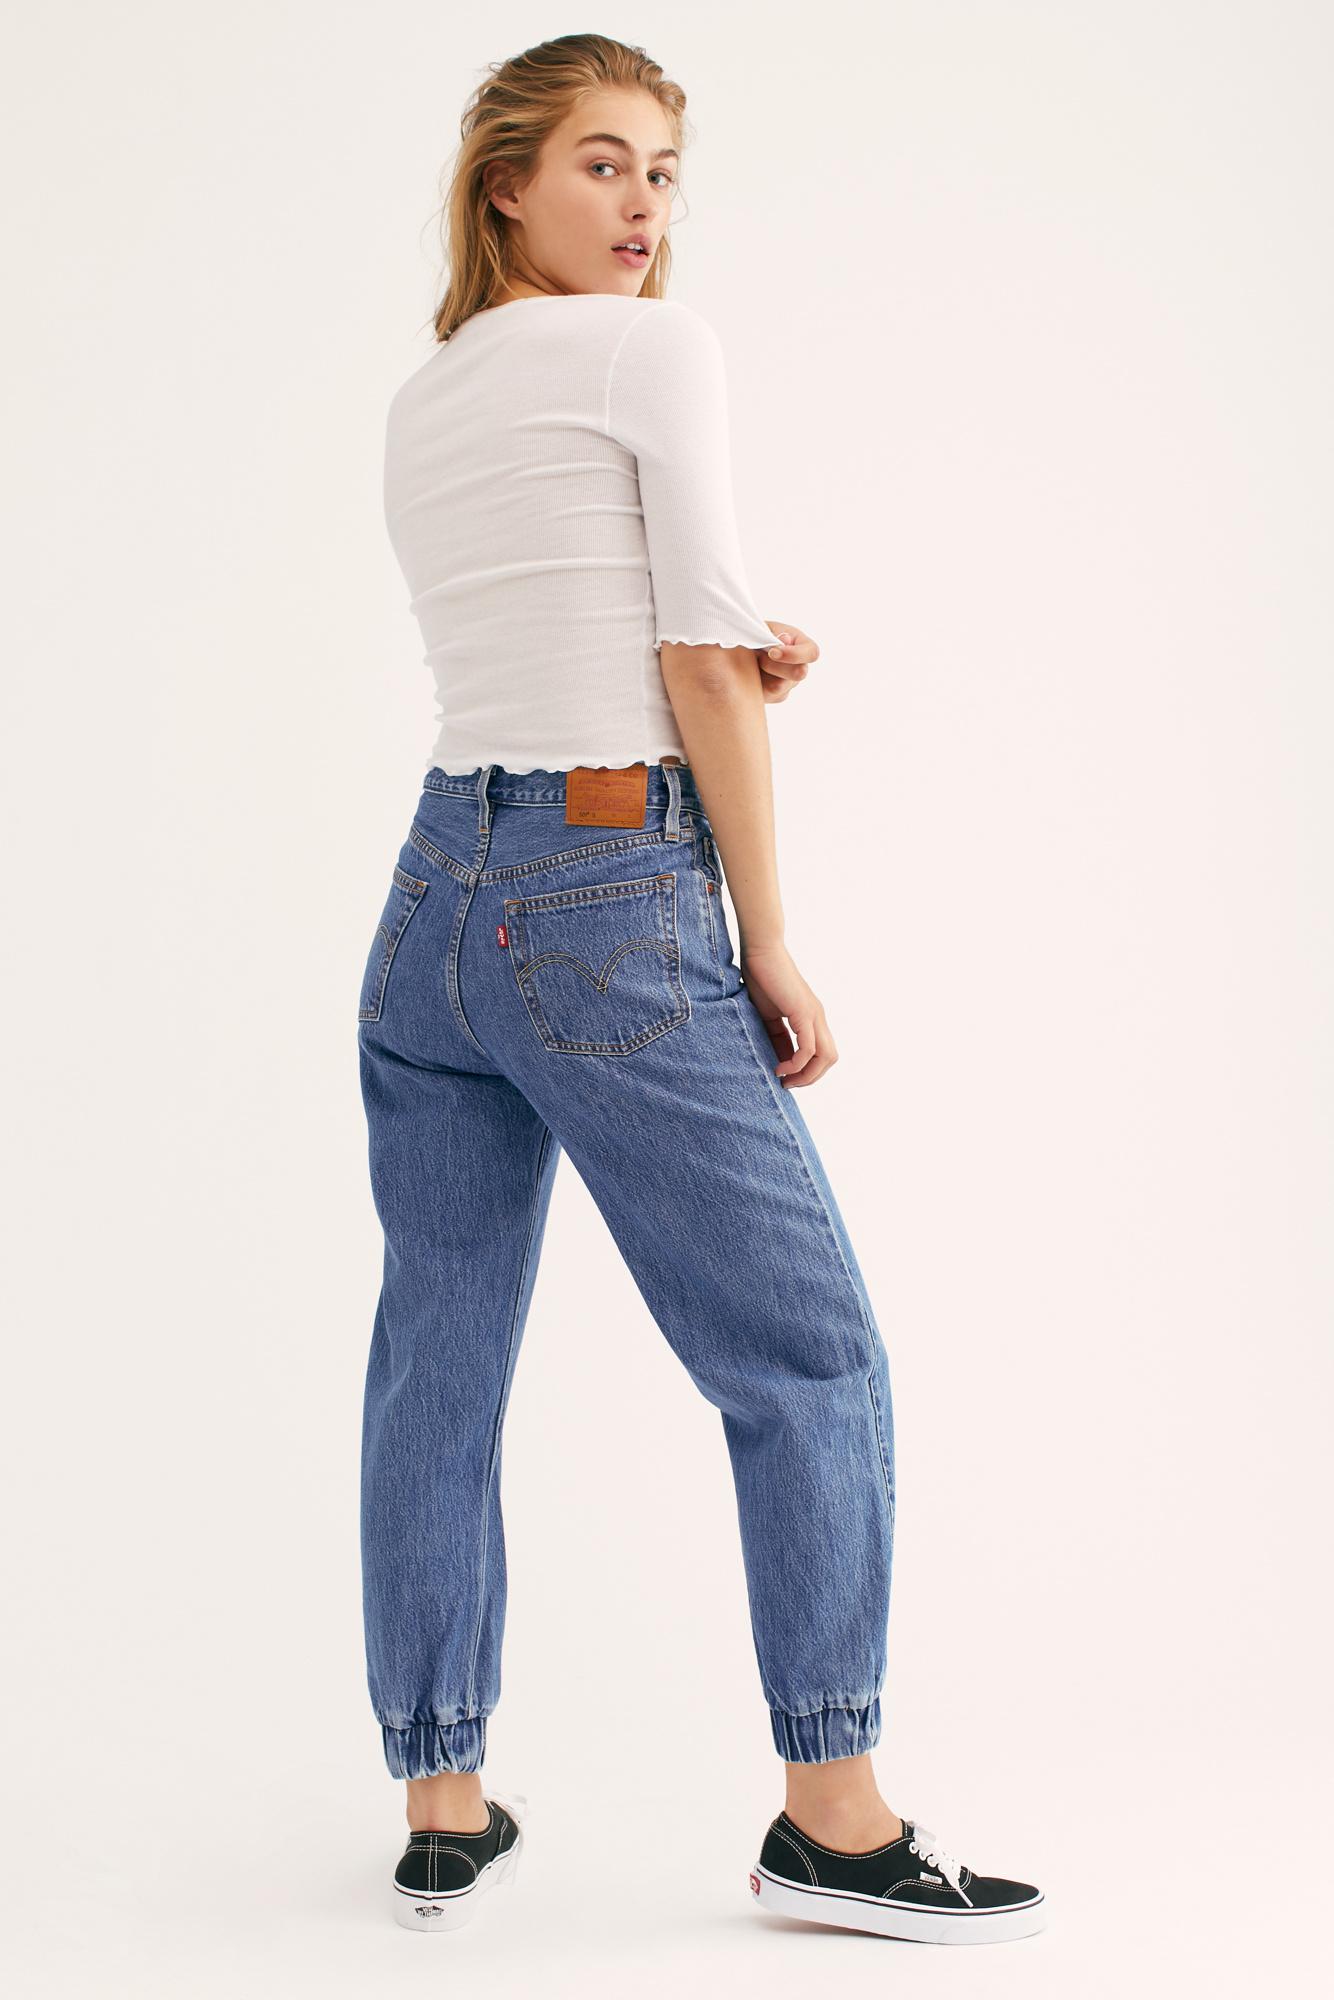 Free People Levi's 501 Jogger Jeans By Levi's in Blue | Lyst